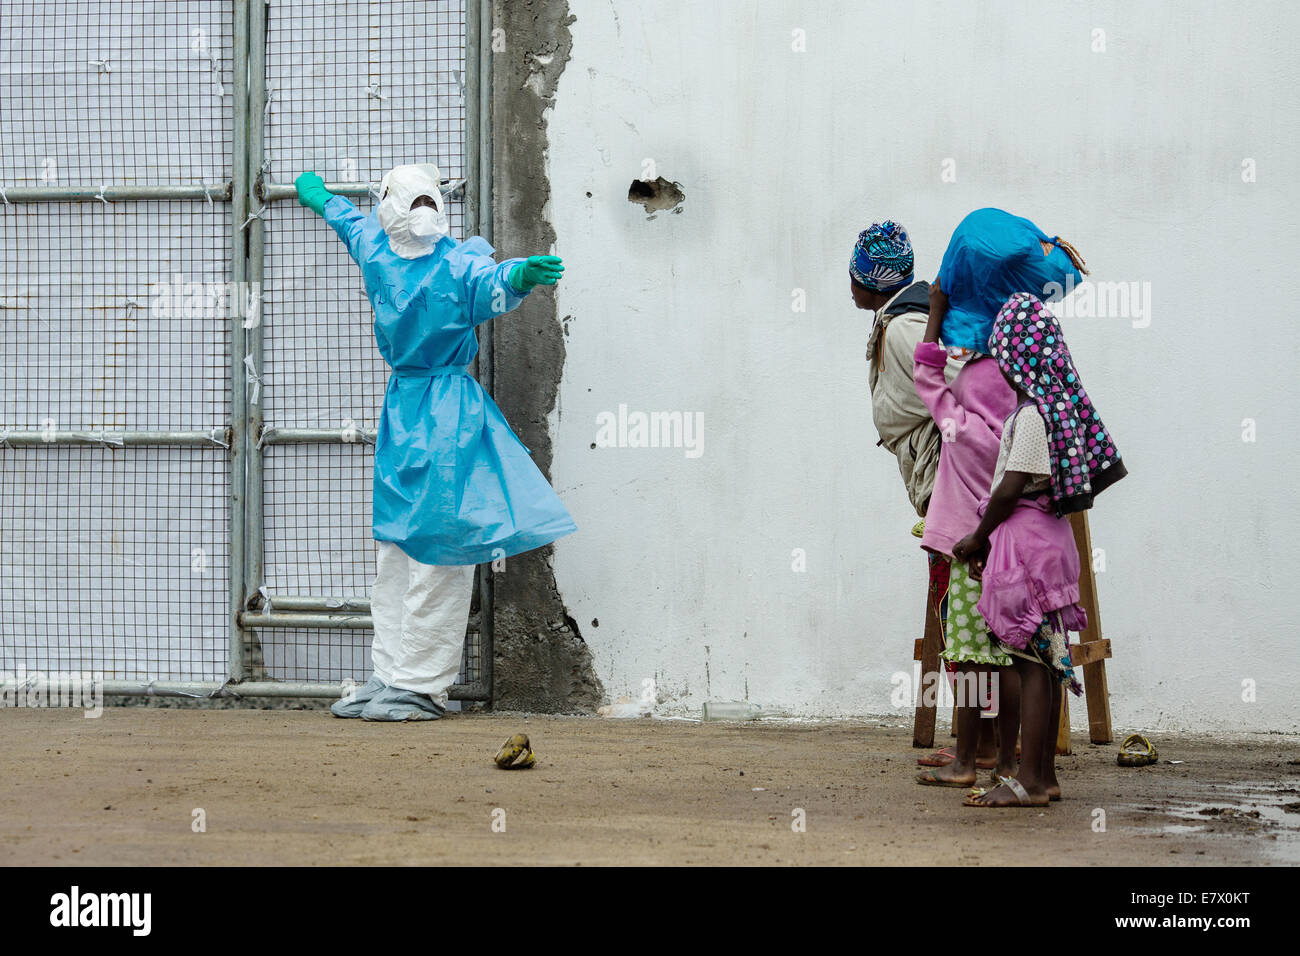 A family waits to enter the newly opened Island Clinic for Ebola treatment September 22, 2014 in Monrovia, Liberia. The facility opened by the WHO and the Ministry of Health in response to the surge of patients needing an Ebola Treatment. Stock Photo